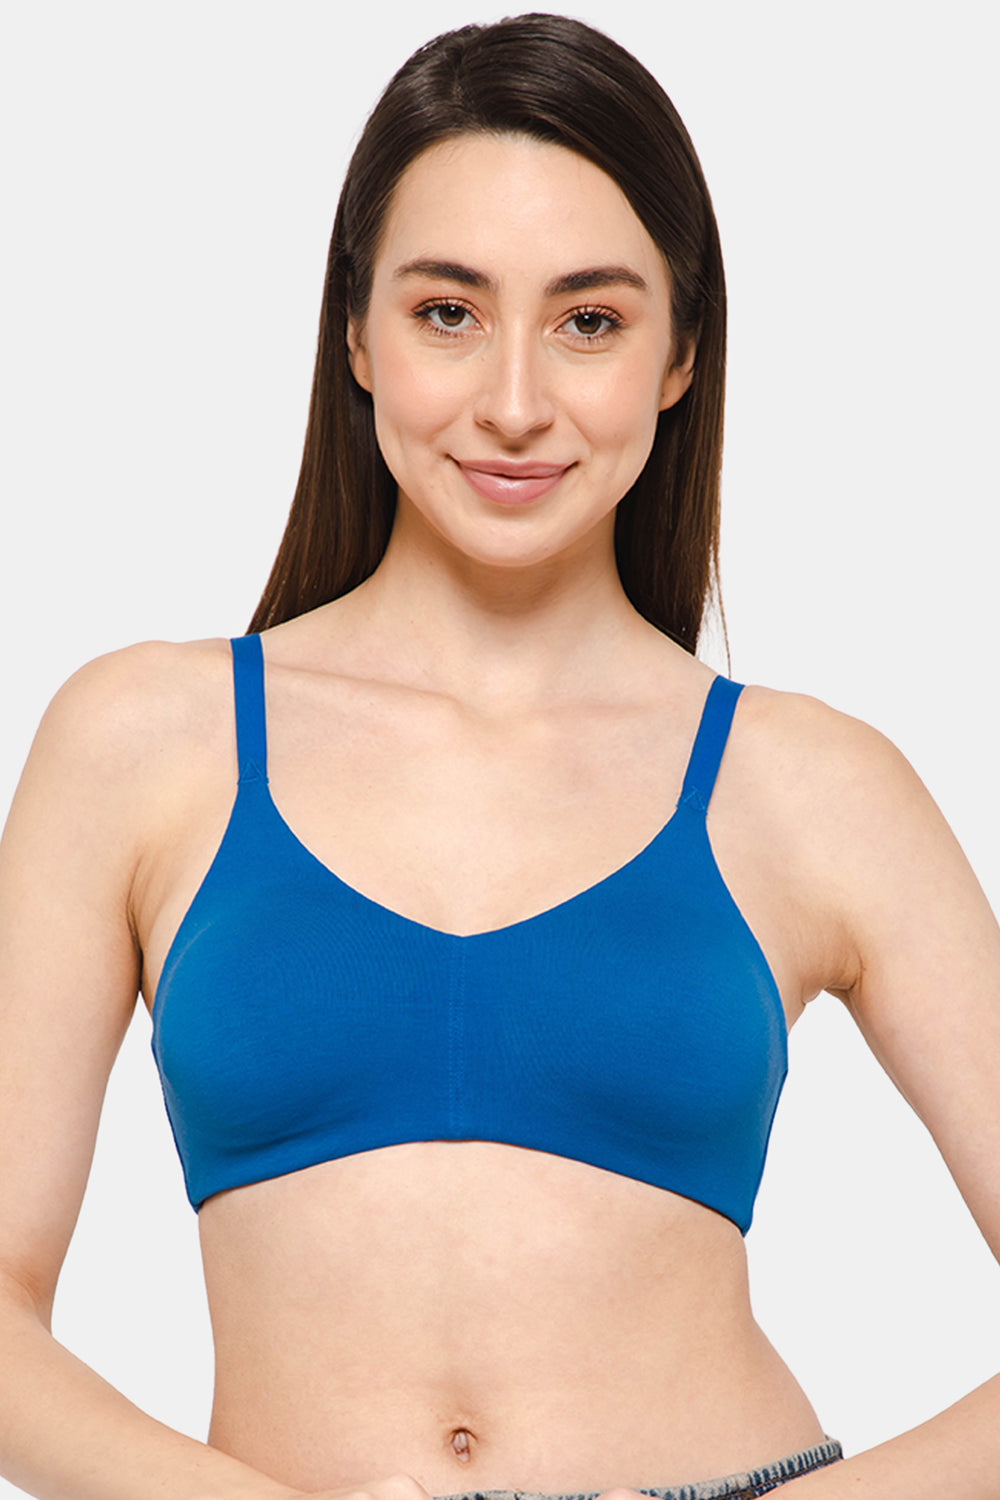 Ribbed Seamless Sports Bra - Cabernet Red – Activae Apparel